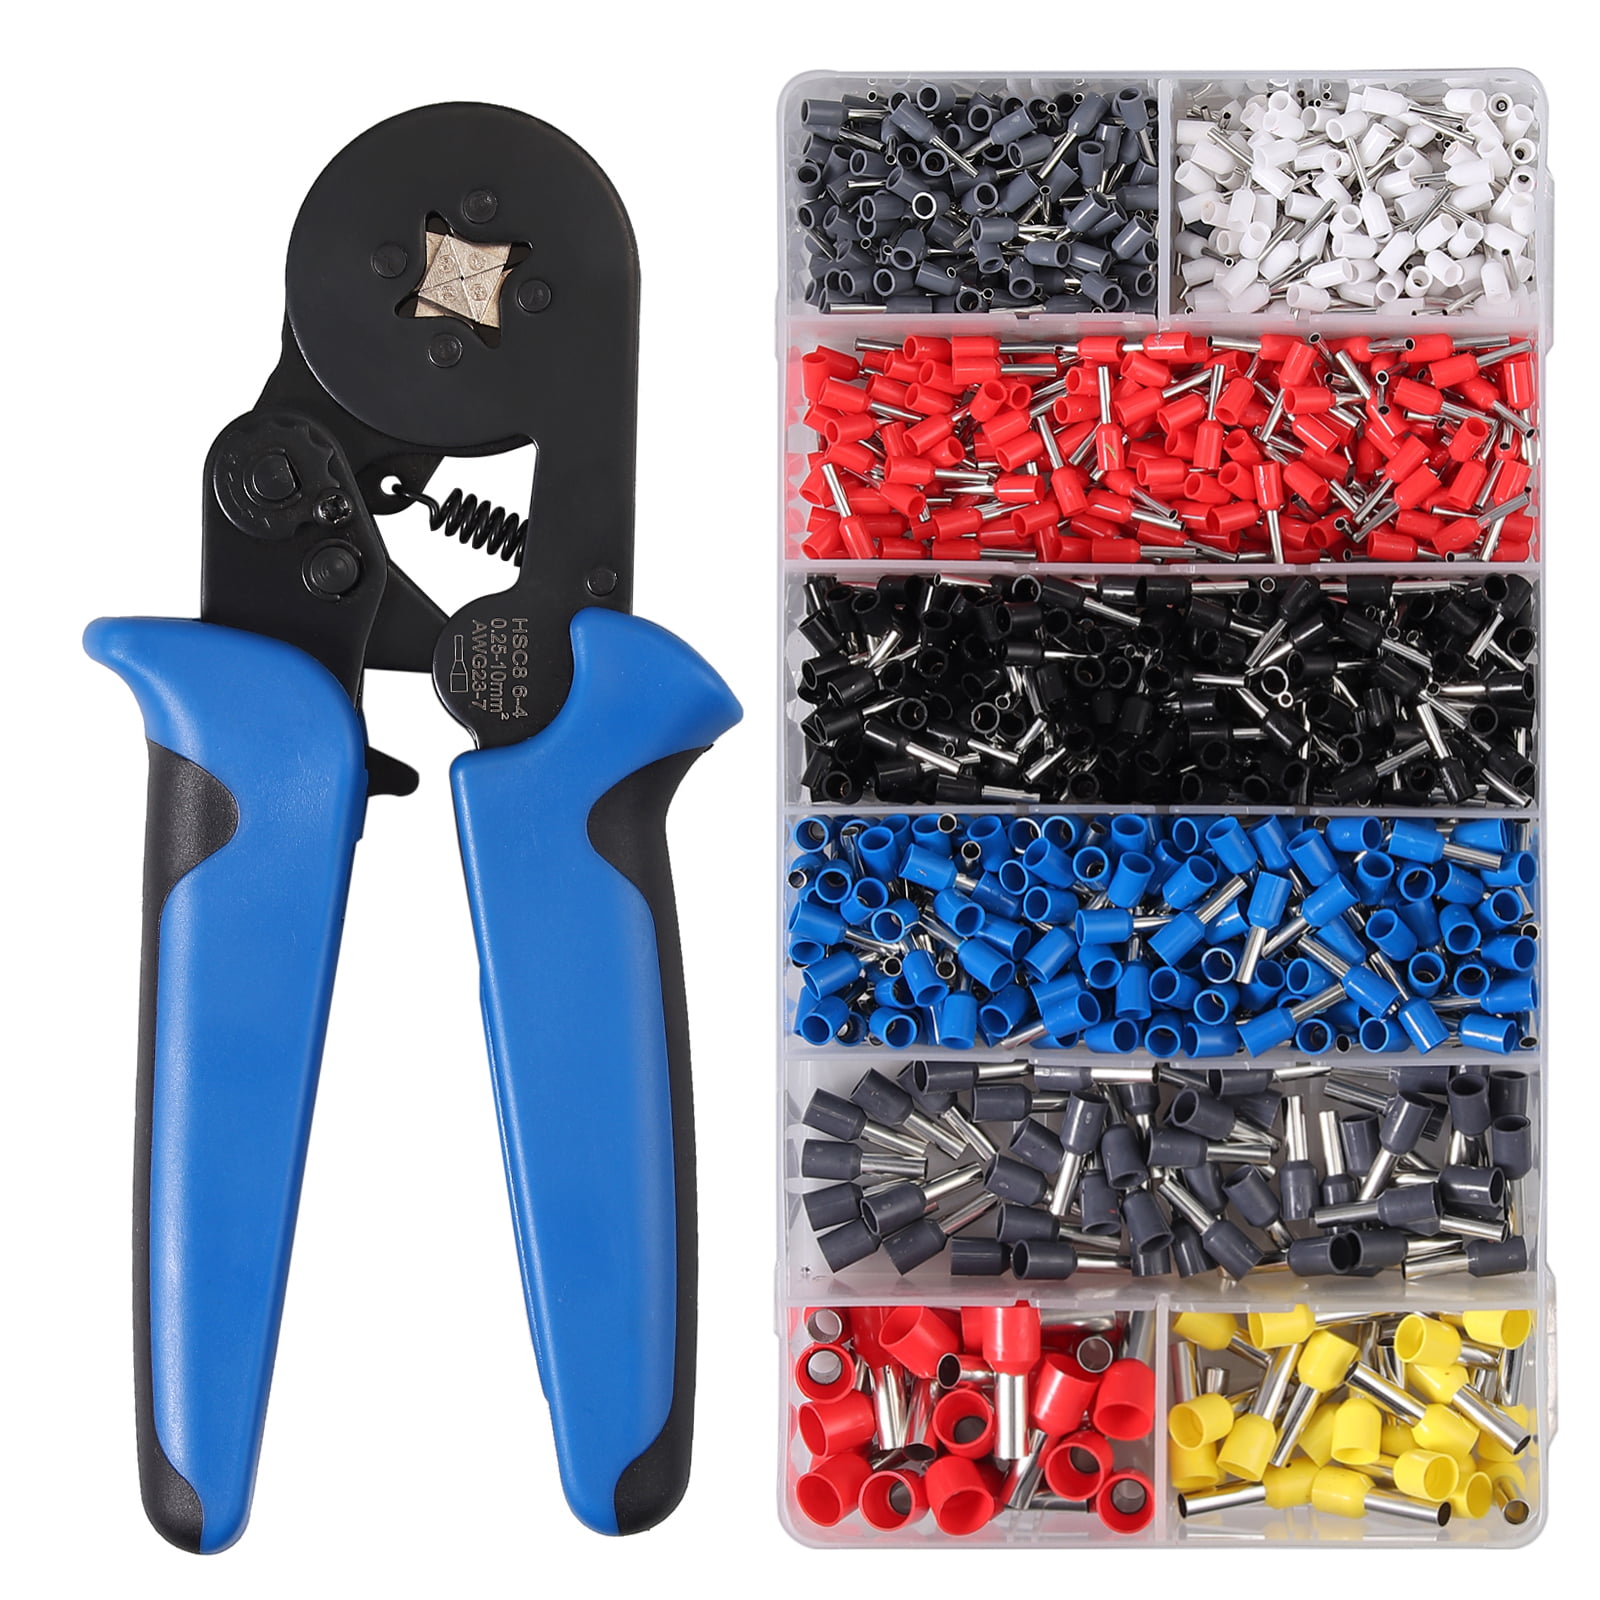 Details about   HEAVY DUTY Crimping Tools Ferrule Wire Crimper Plier Tool New RED BLUE YELLOW 